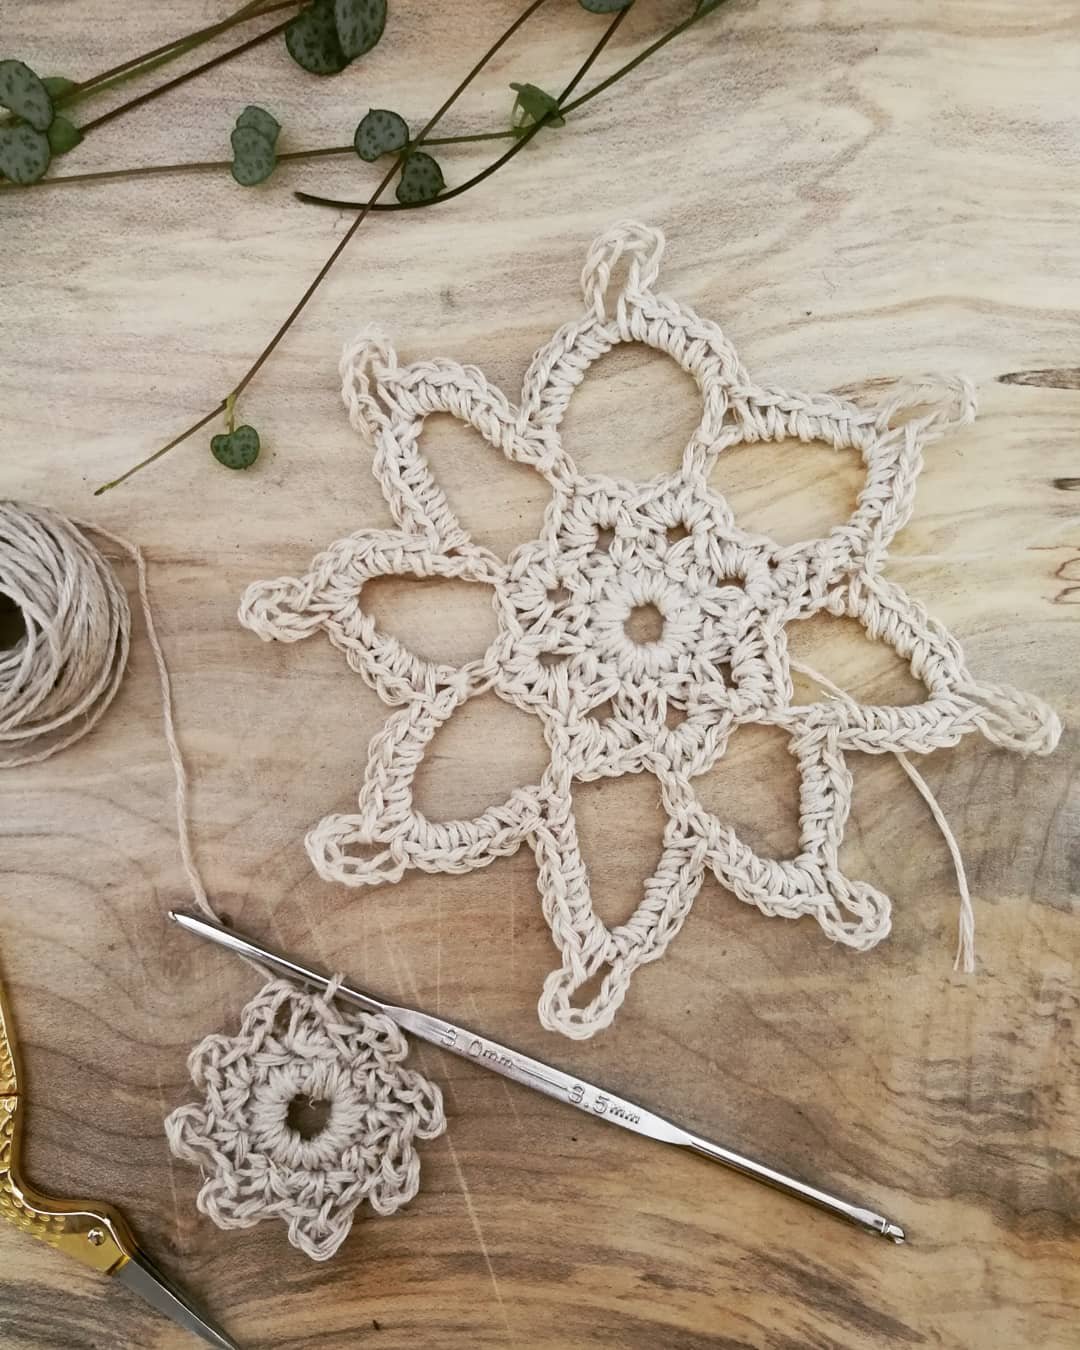 A natural coloured crocheted snowflake with 8 points is sat on a light wooden board. Each point has a triangular open space below it which leads onto a central flower shape with 8 petals. There is a small hole in the centre.